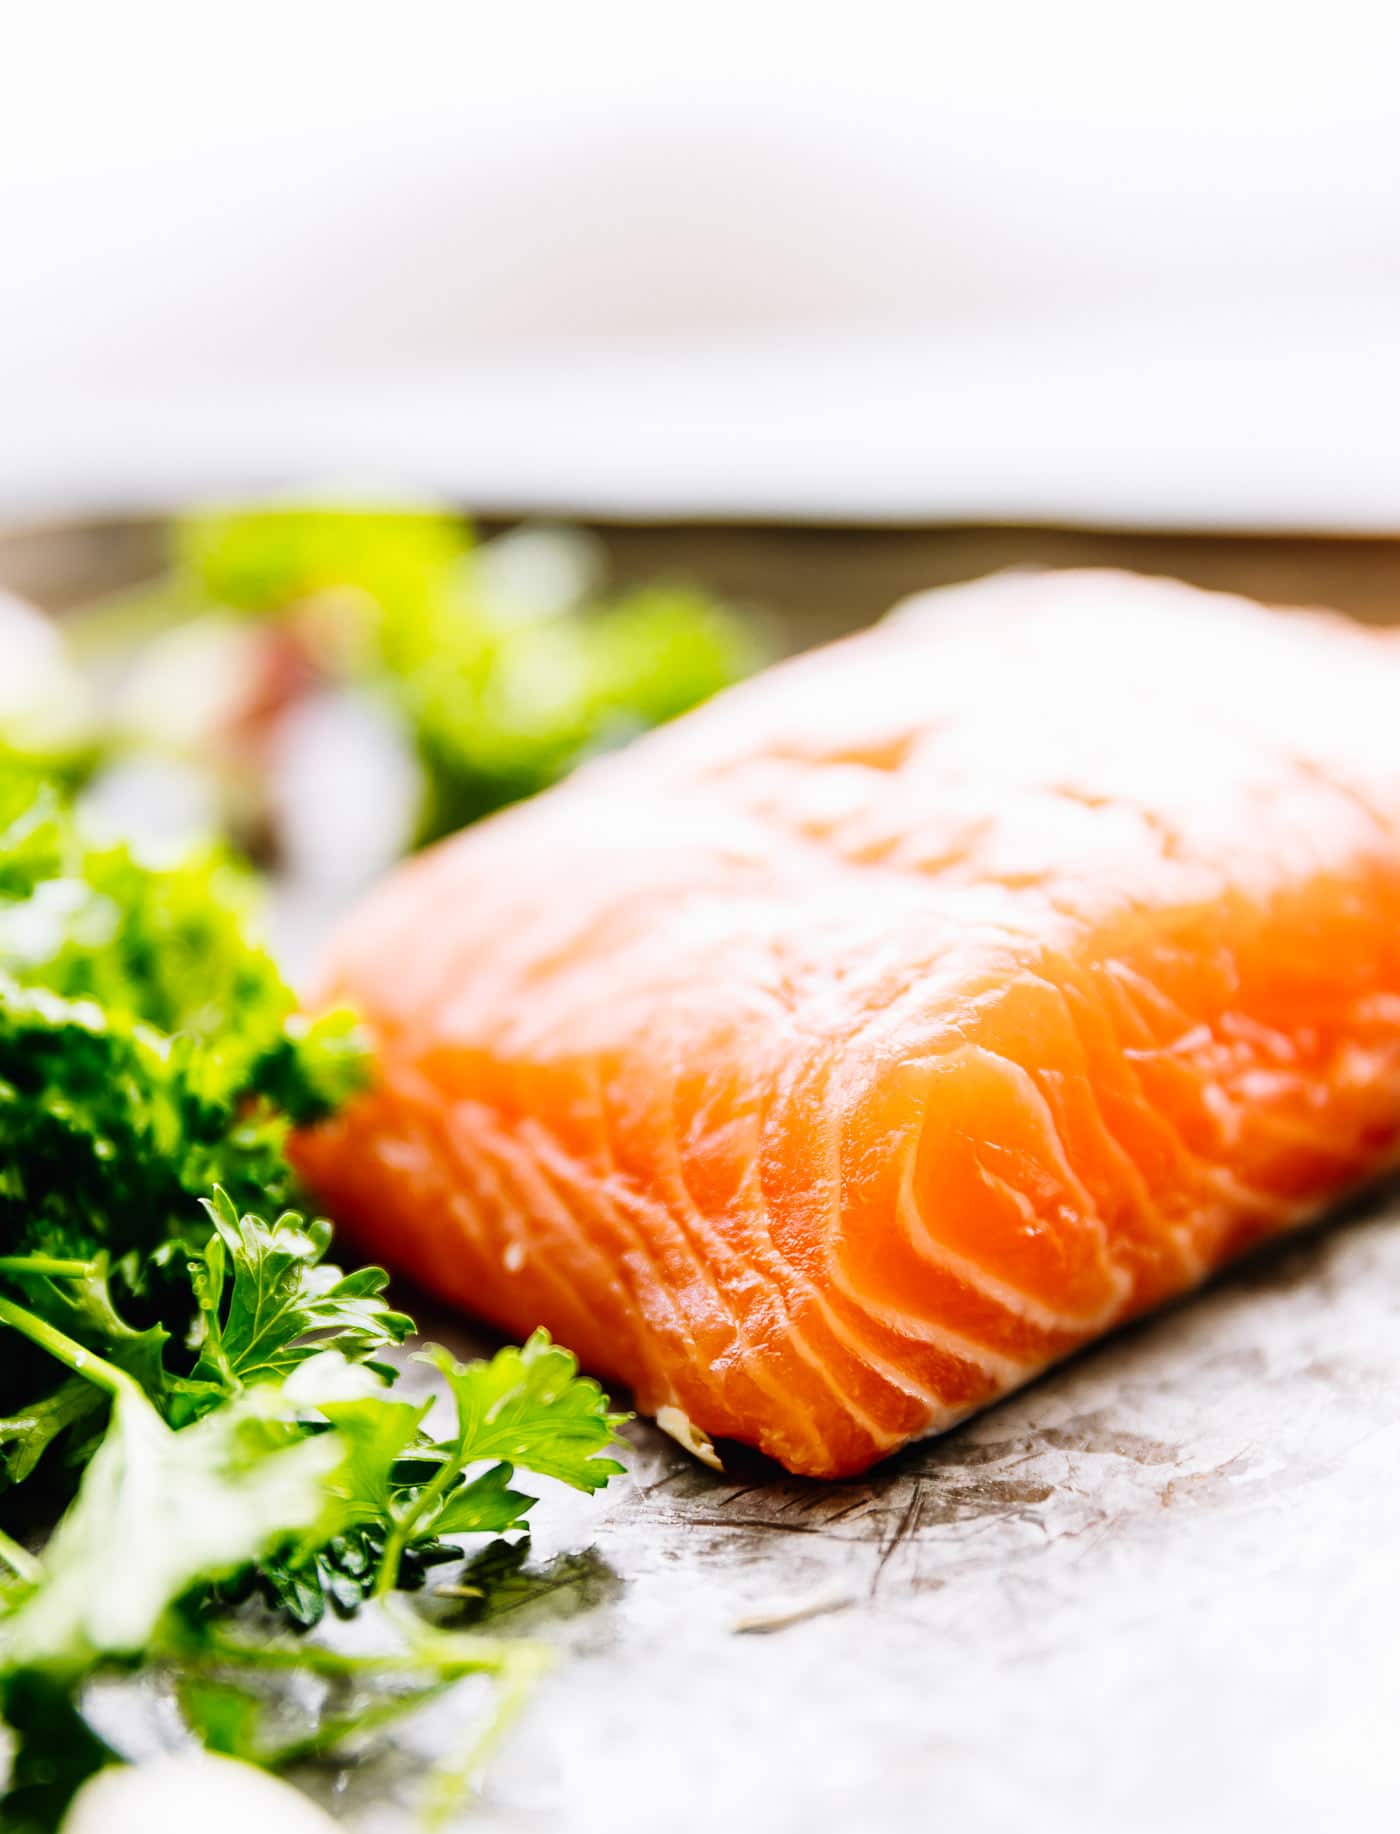 a close up image of a raw piece of salmon with greens on the side